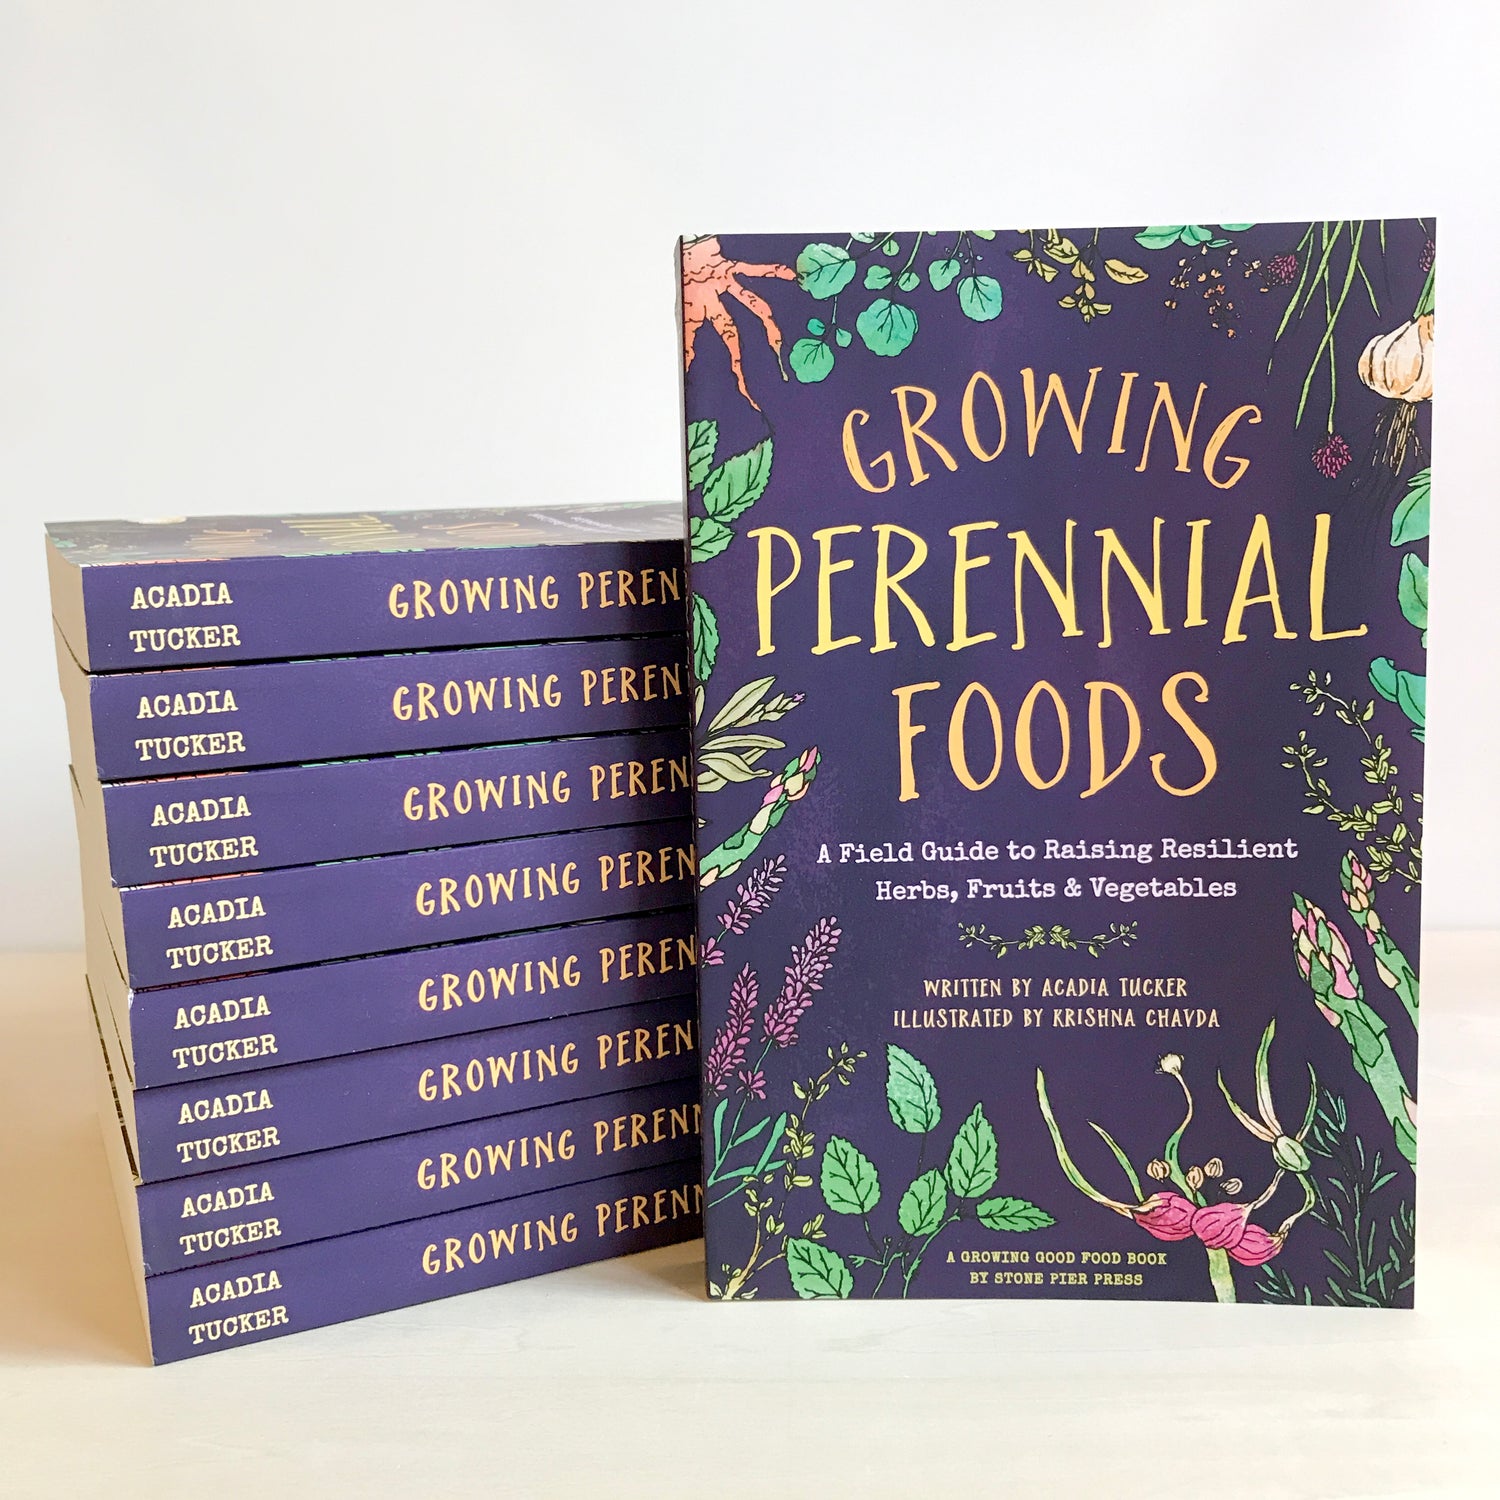 "growing perennial foods" book showcasing front cover while standing up against a stack of the same books